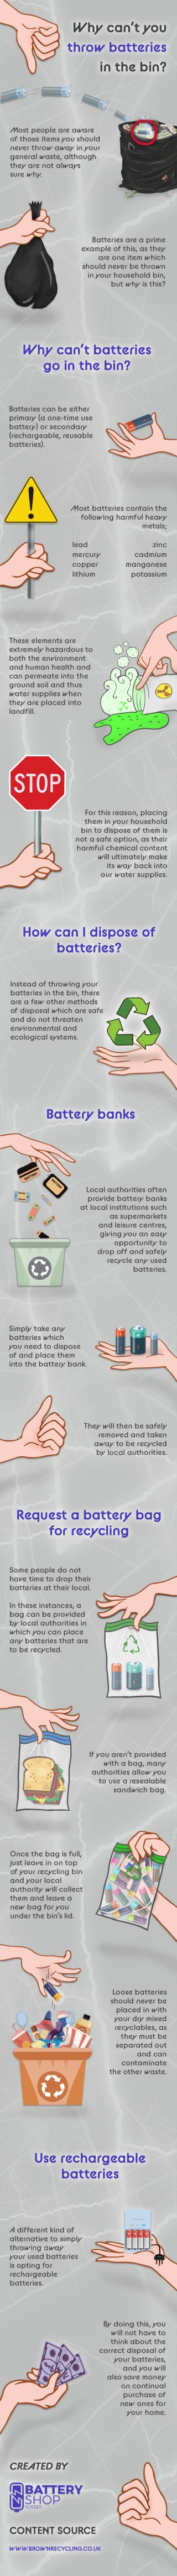 Why Can’t You Throw Batteries In The Bin?